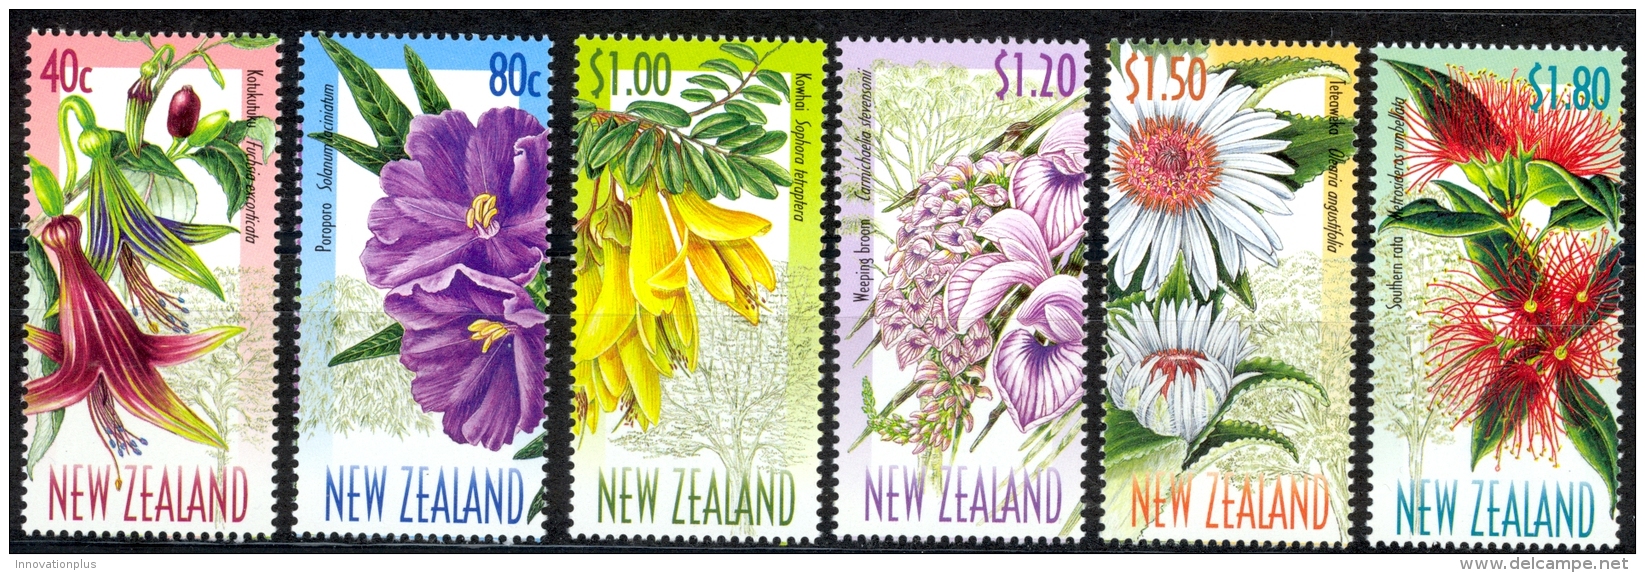 New Zealand Sc# 1563-1568 MNH 1999 Native Tree Flowers - Unused Stamps